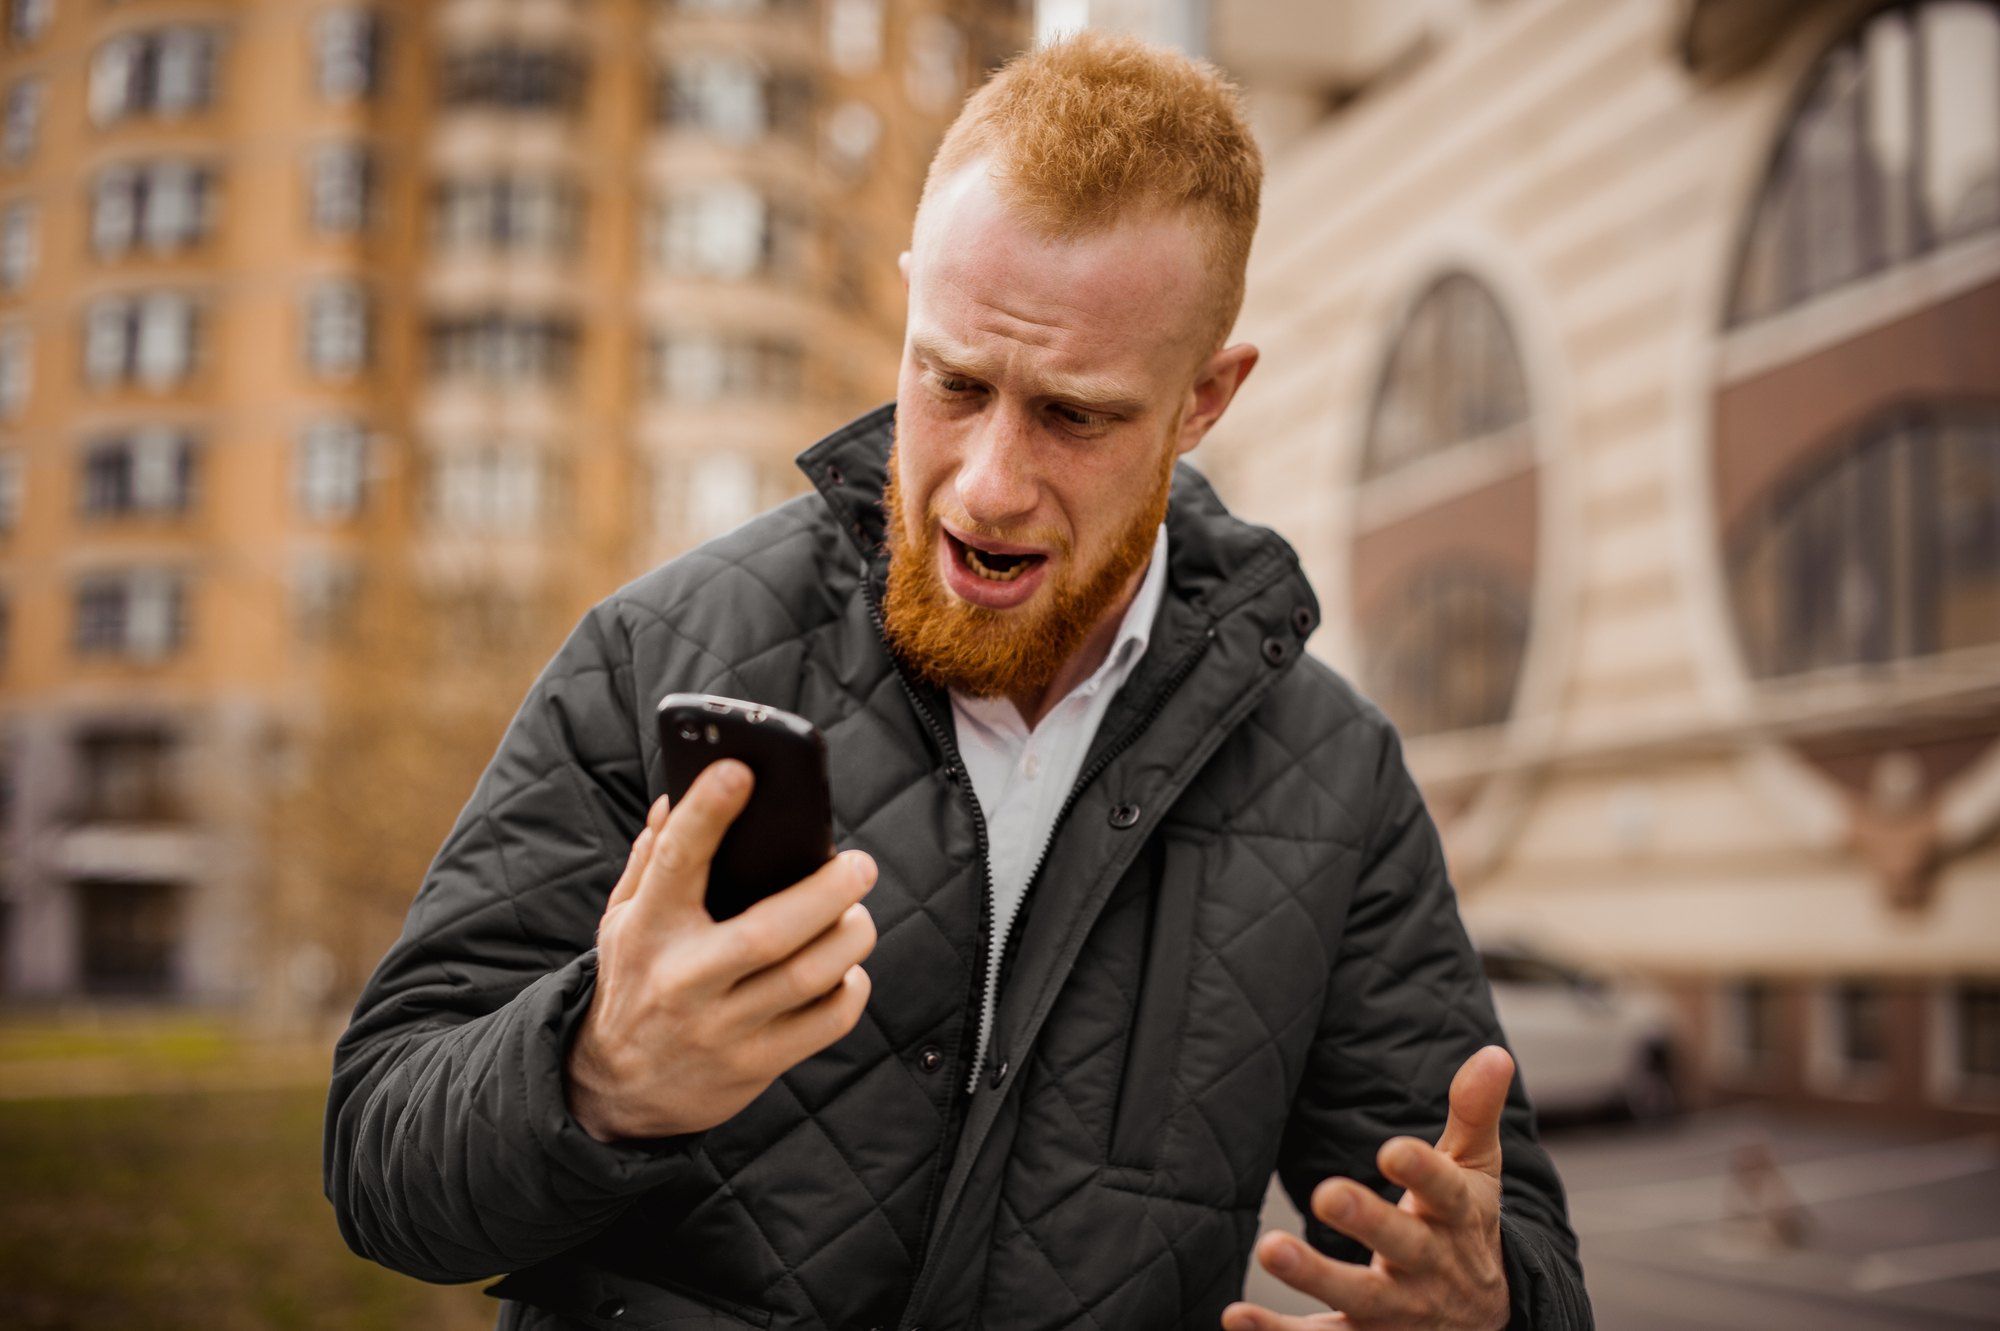 annoyed man yelling at cell phone